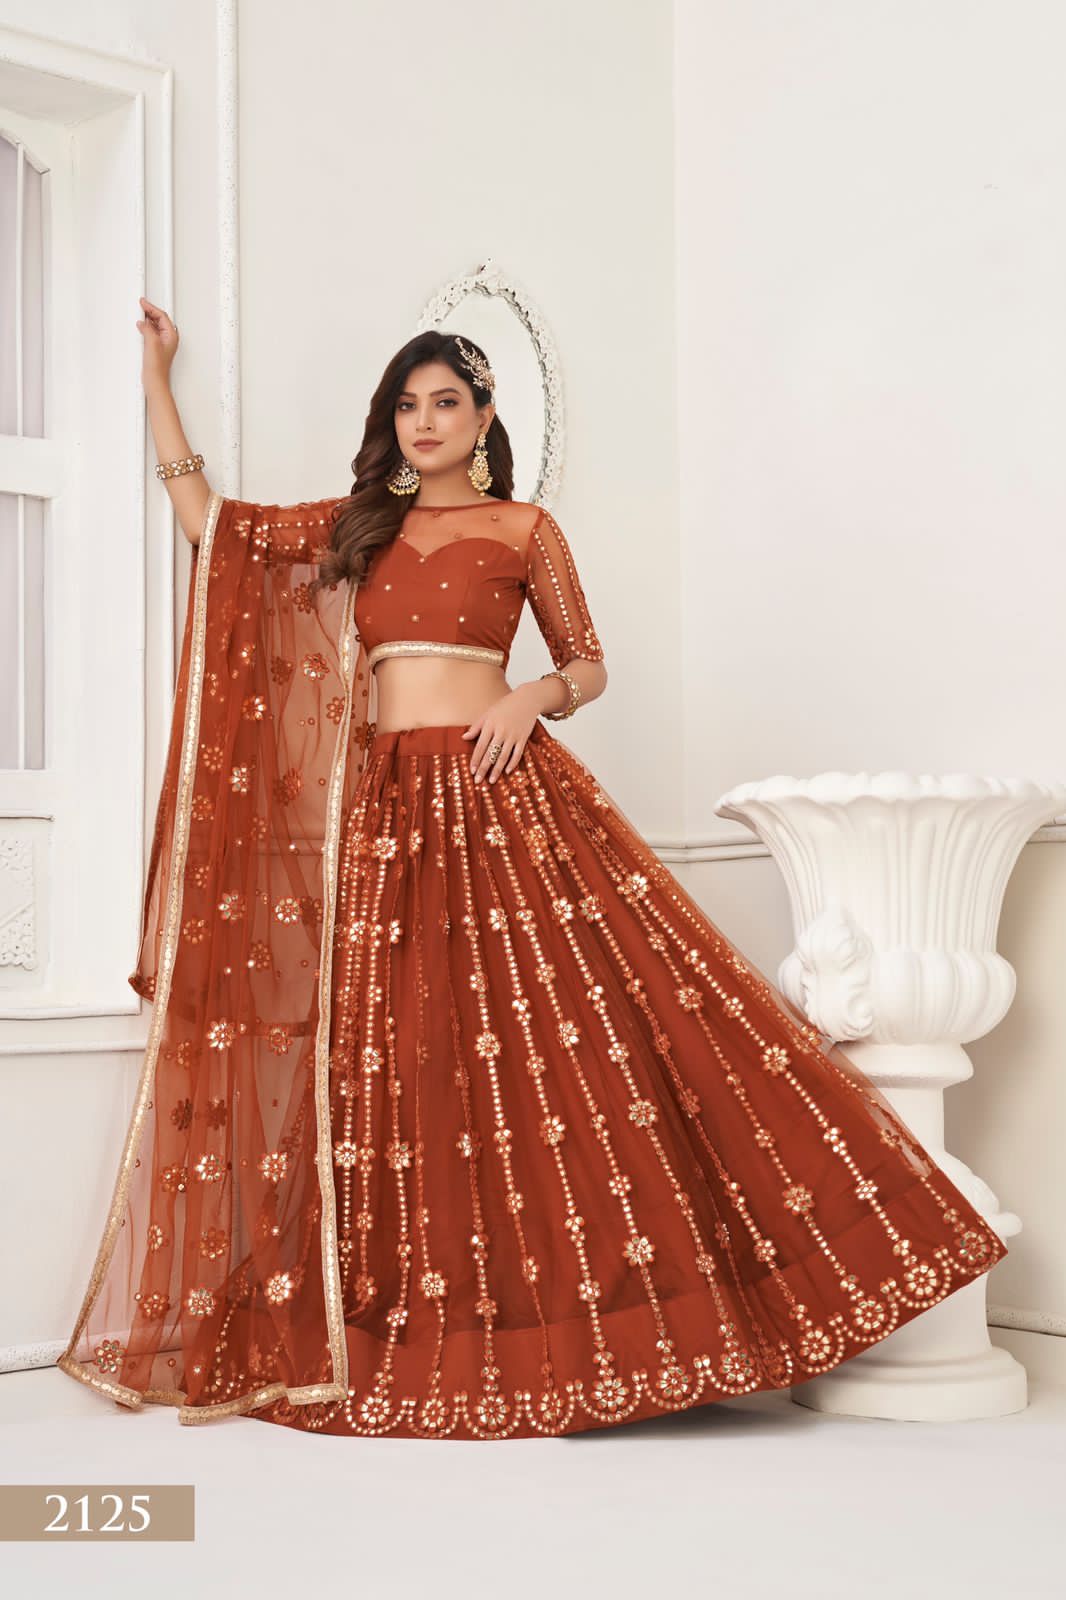 Coffe Thread, Mirror and Sequence work Embroidery  lehenga choli with Net dupatta